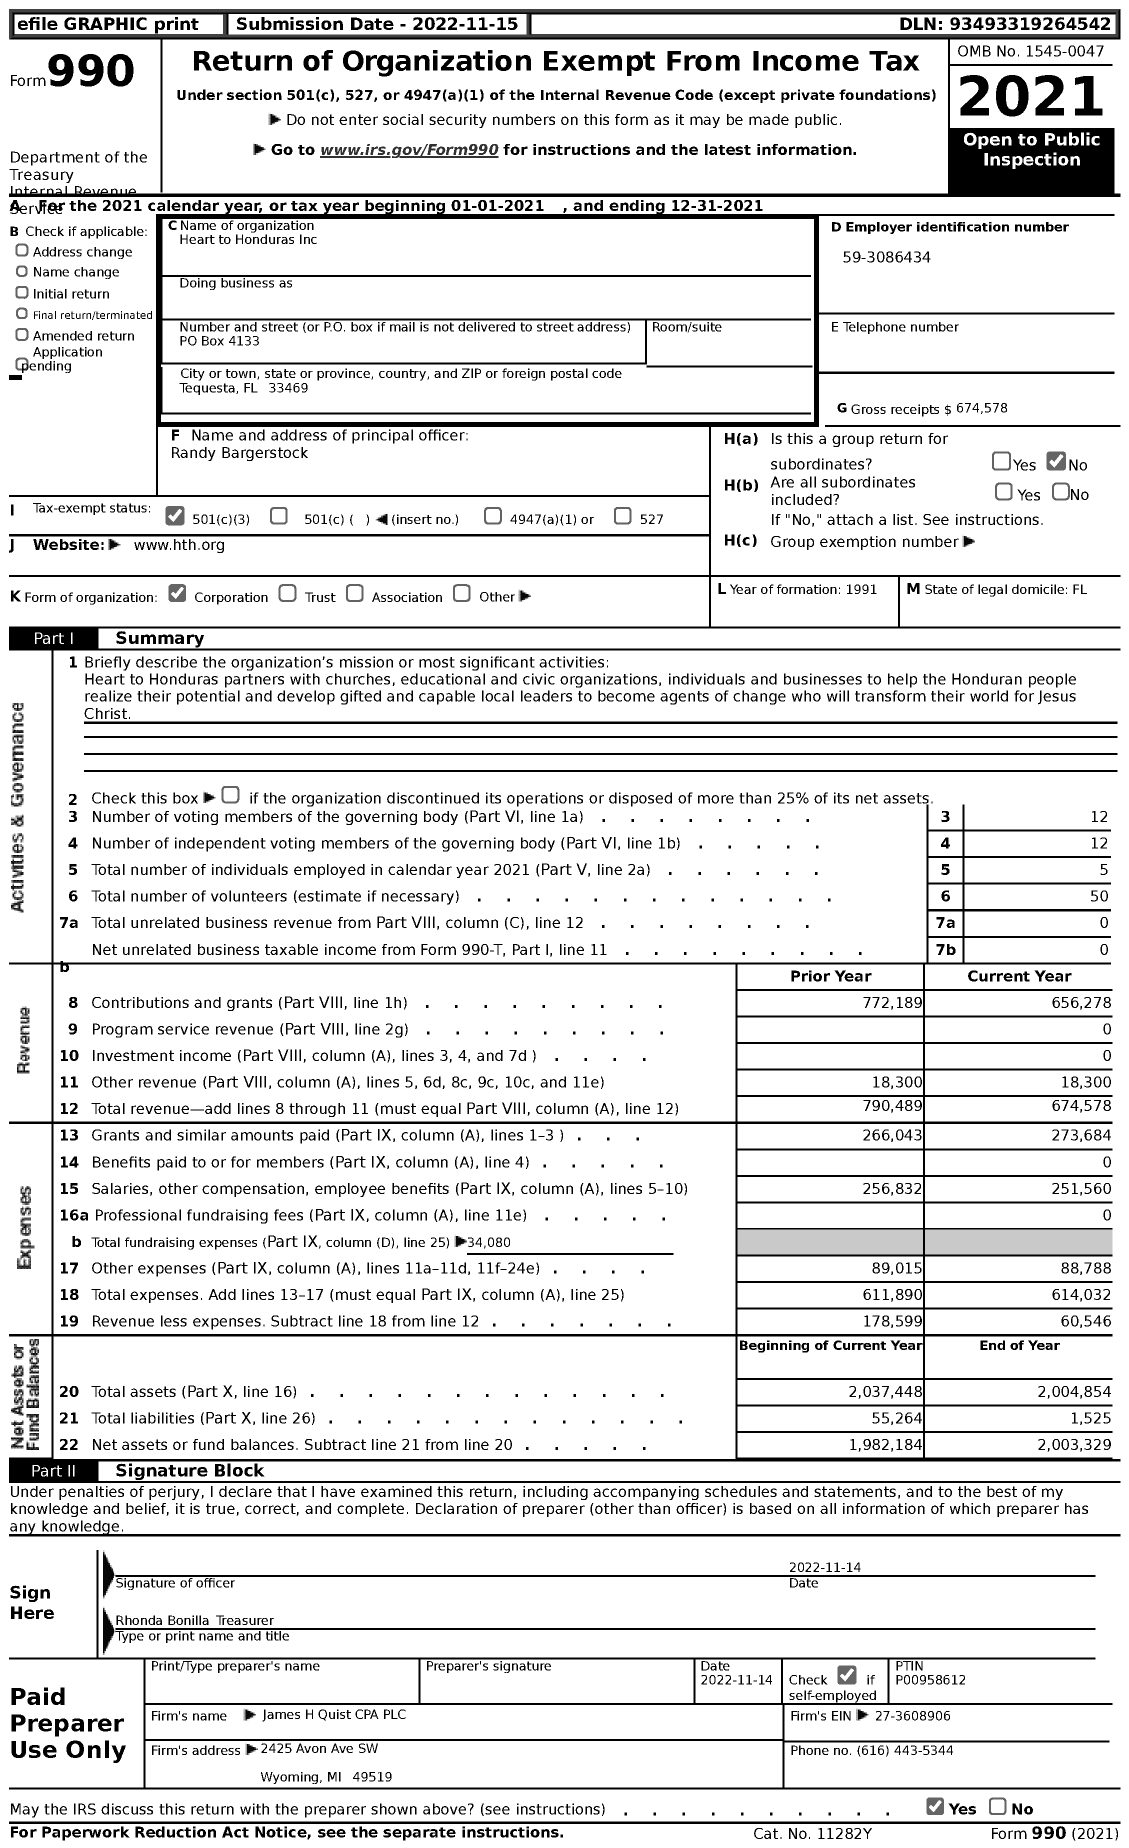 Image of first page of 2021 Form 990 for Heart to Honduras (HTH)